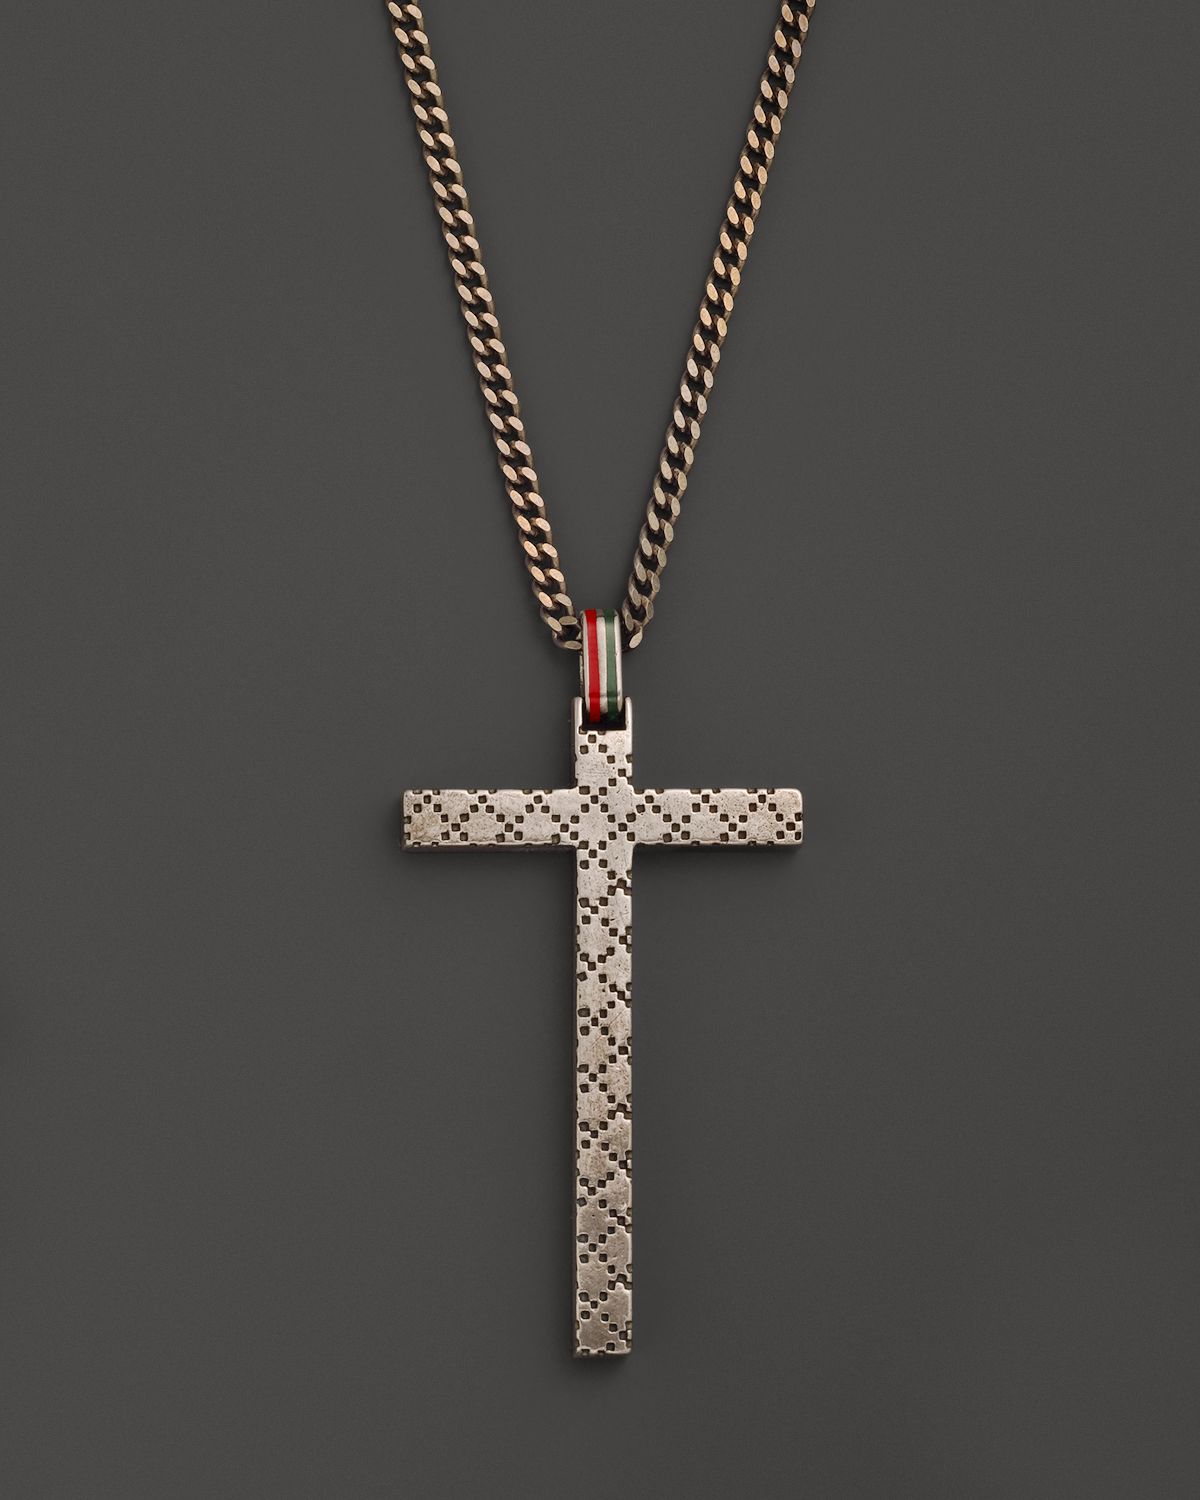 Lyst - Gucci Sterling Silver and Enamel Diamante Necklace with Cross